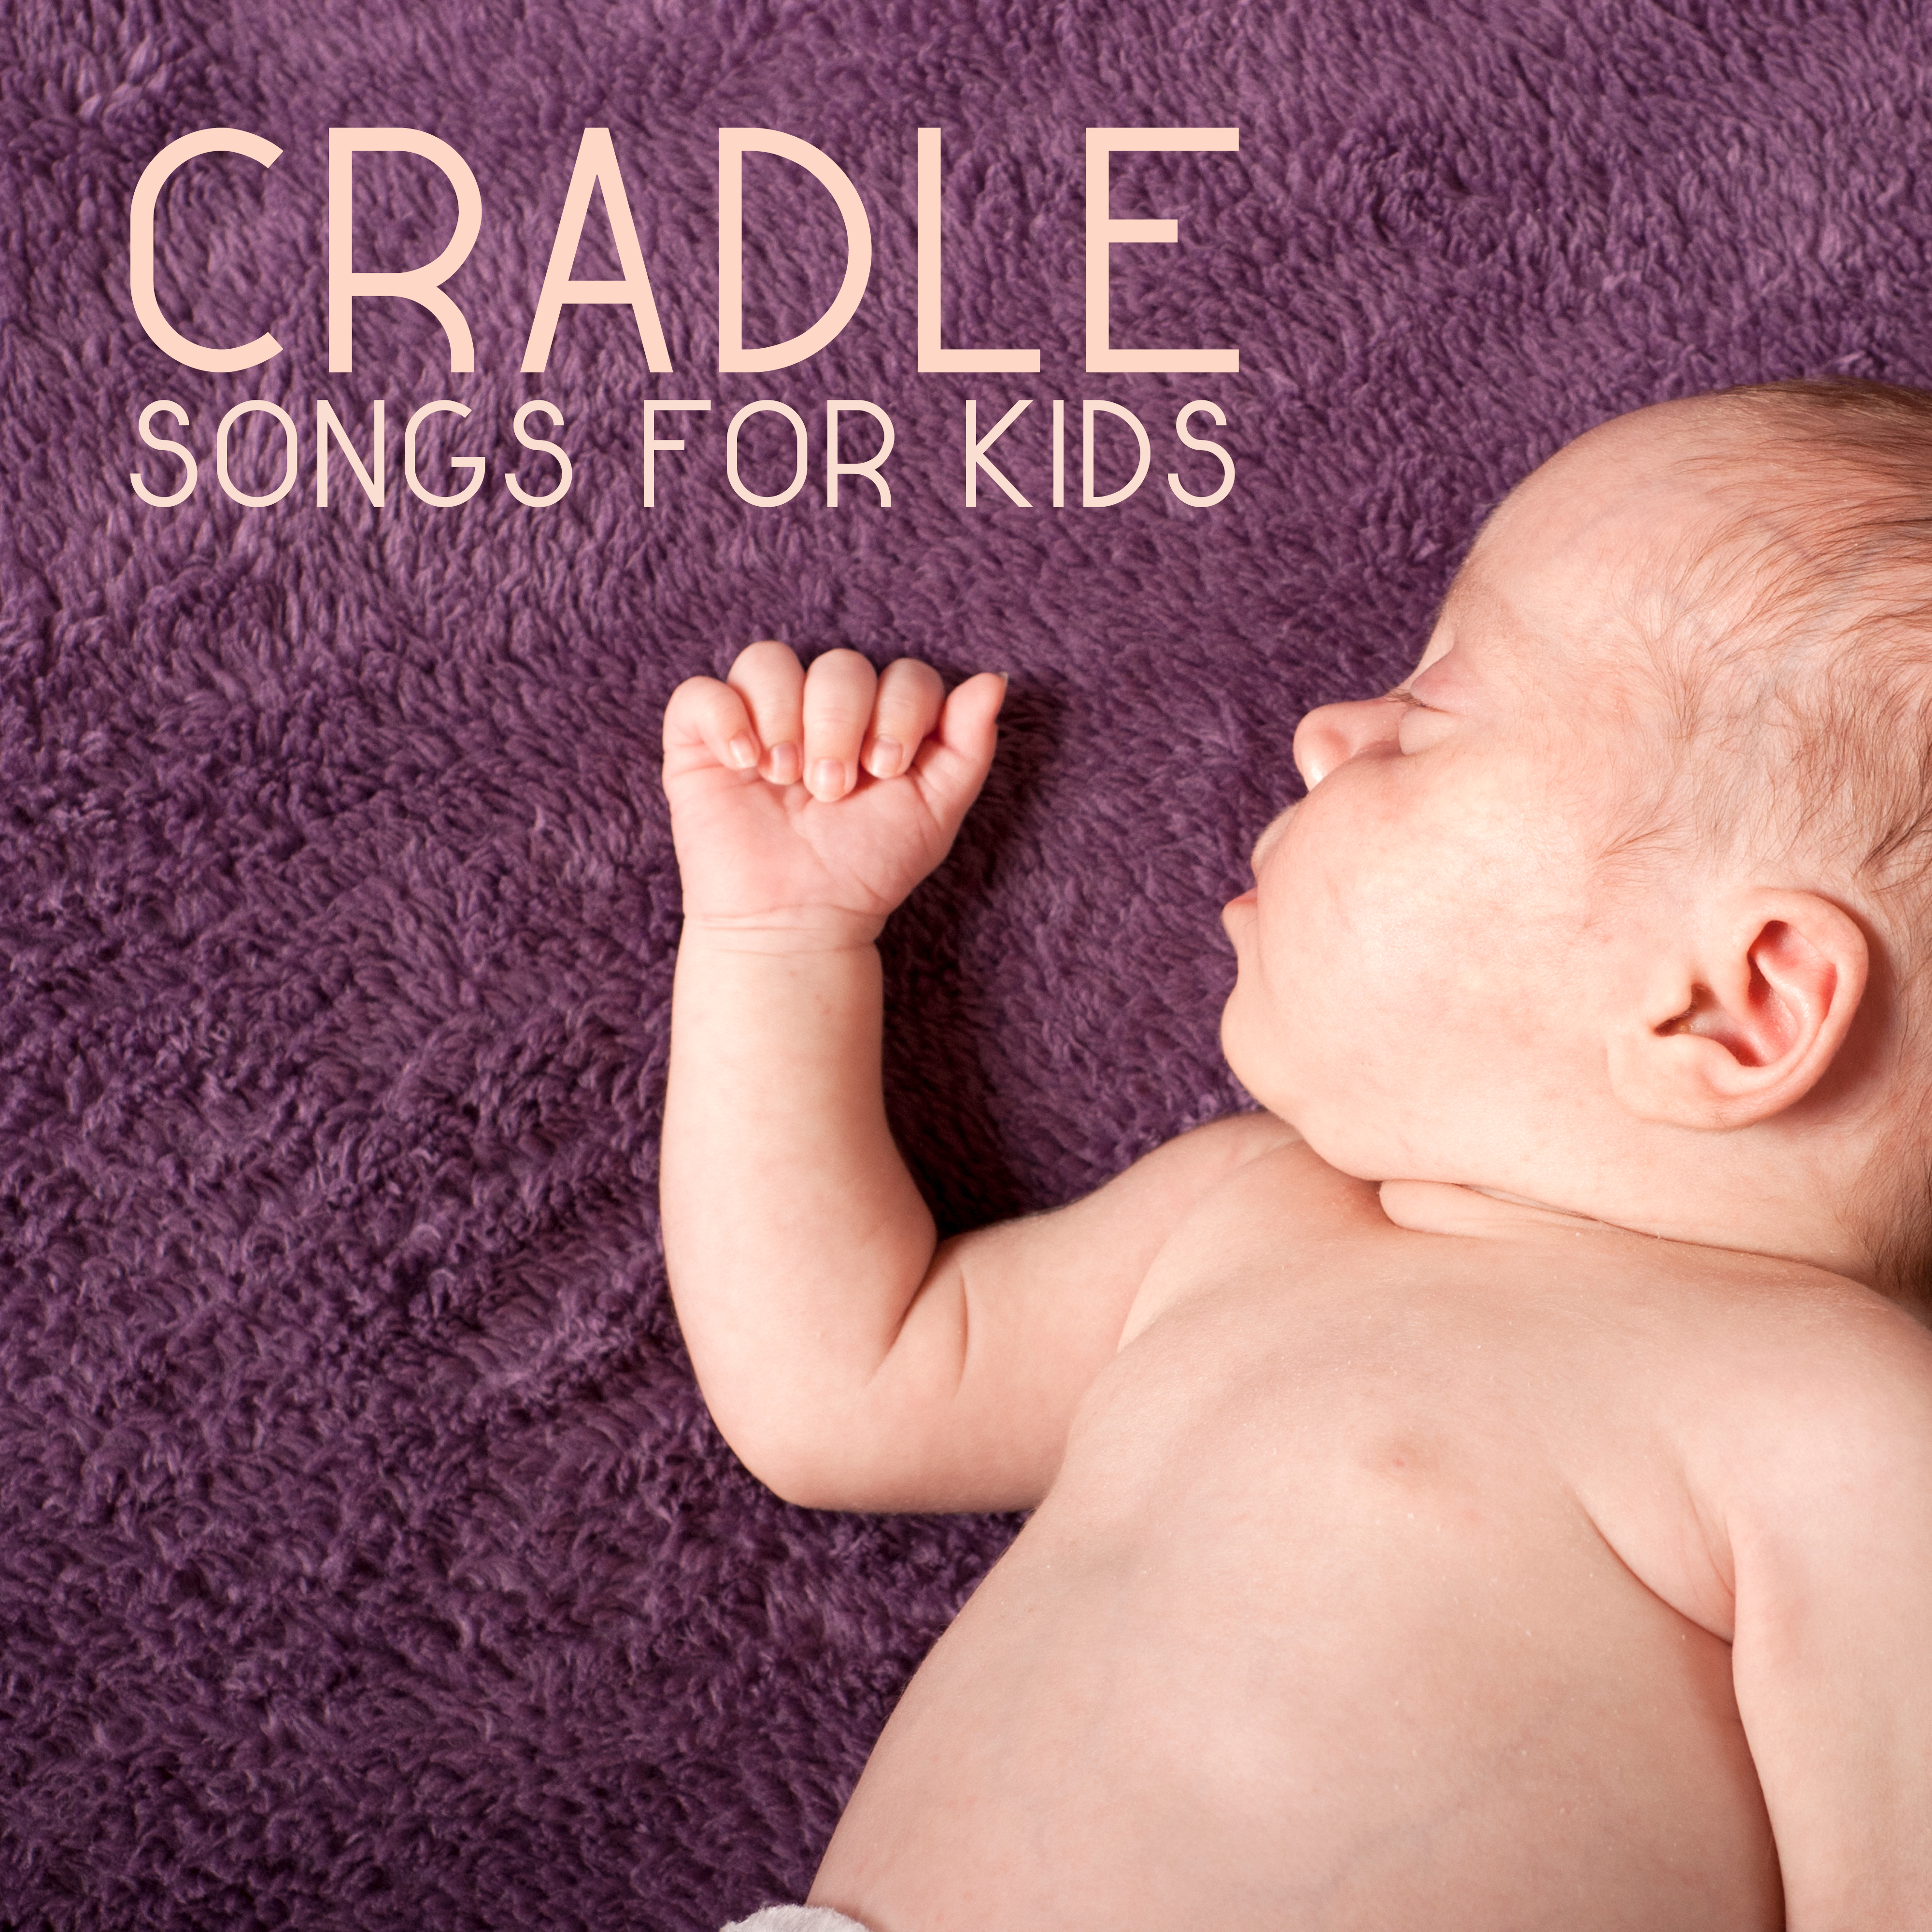 Cradle Songs for Kids – Deep Dreams, Peaceful Music for Baby, Restful Sleep, Baby Music, Naptime, Relaxation Bedtime